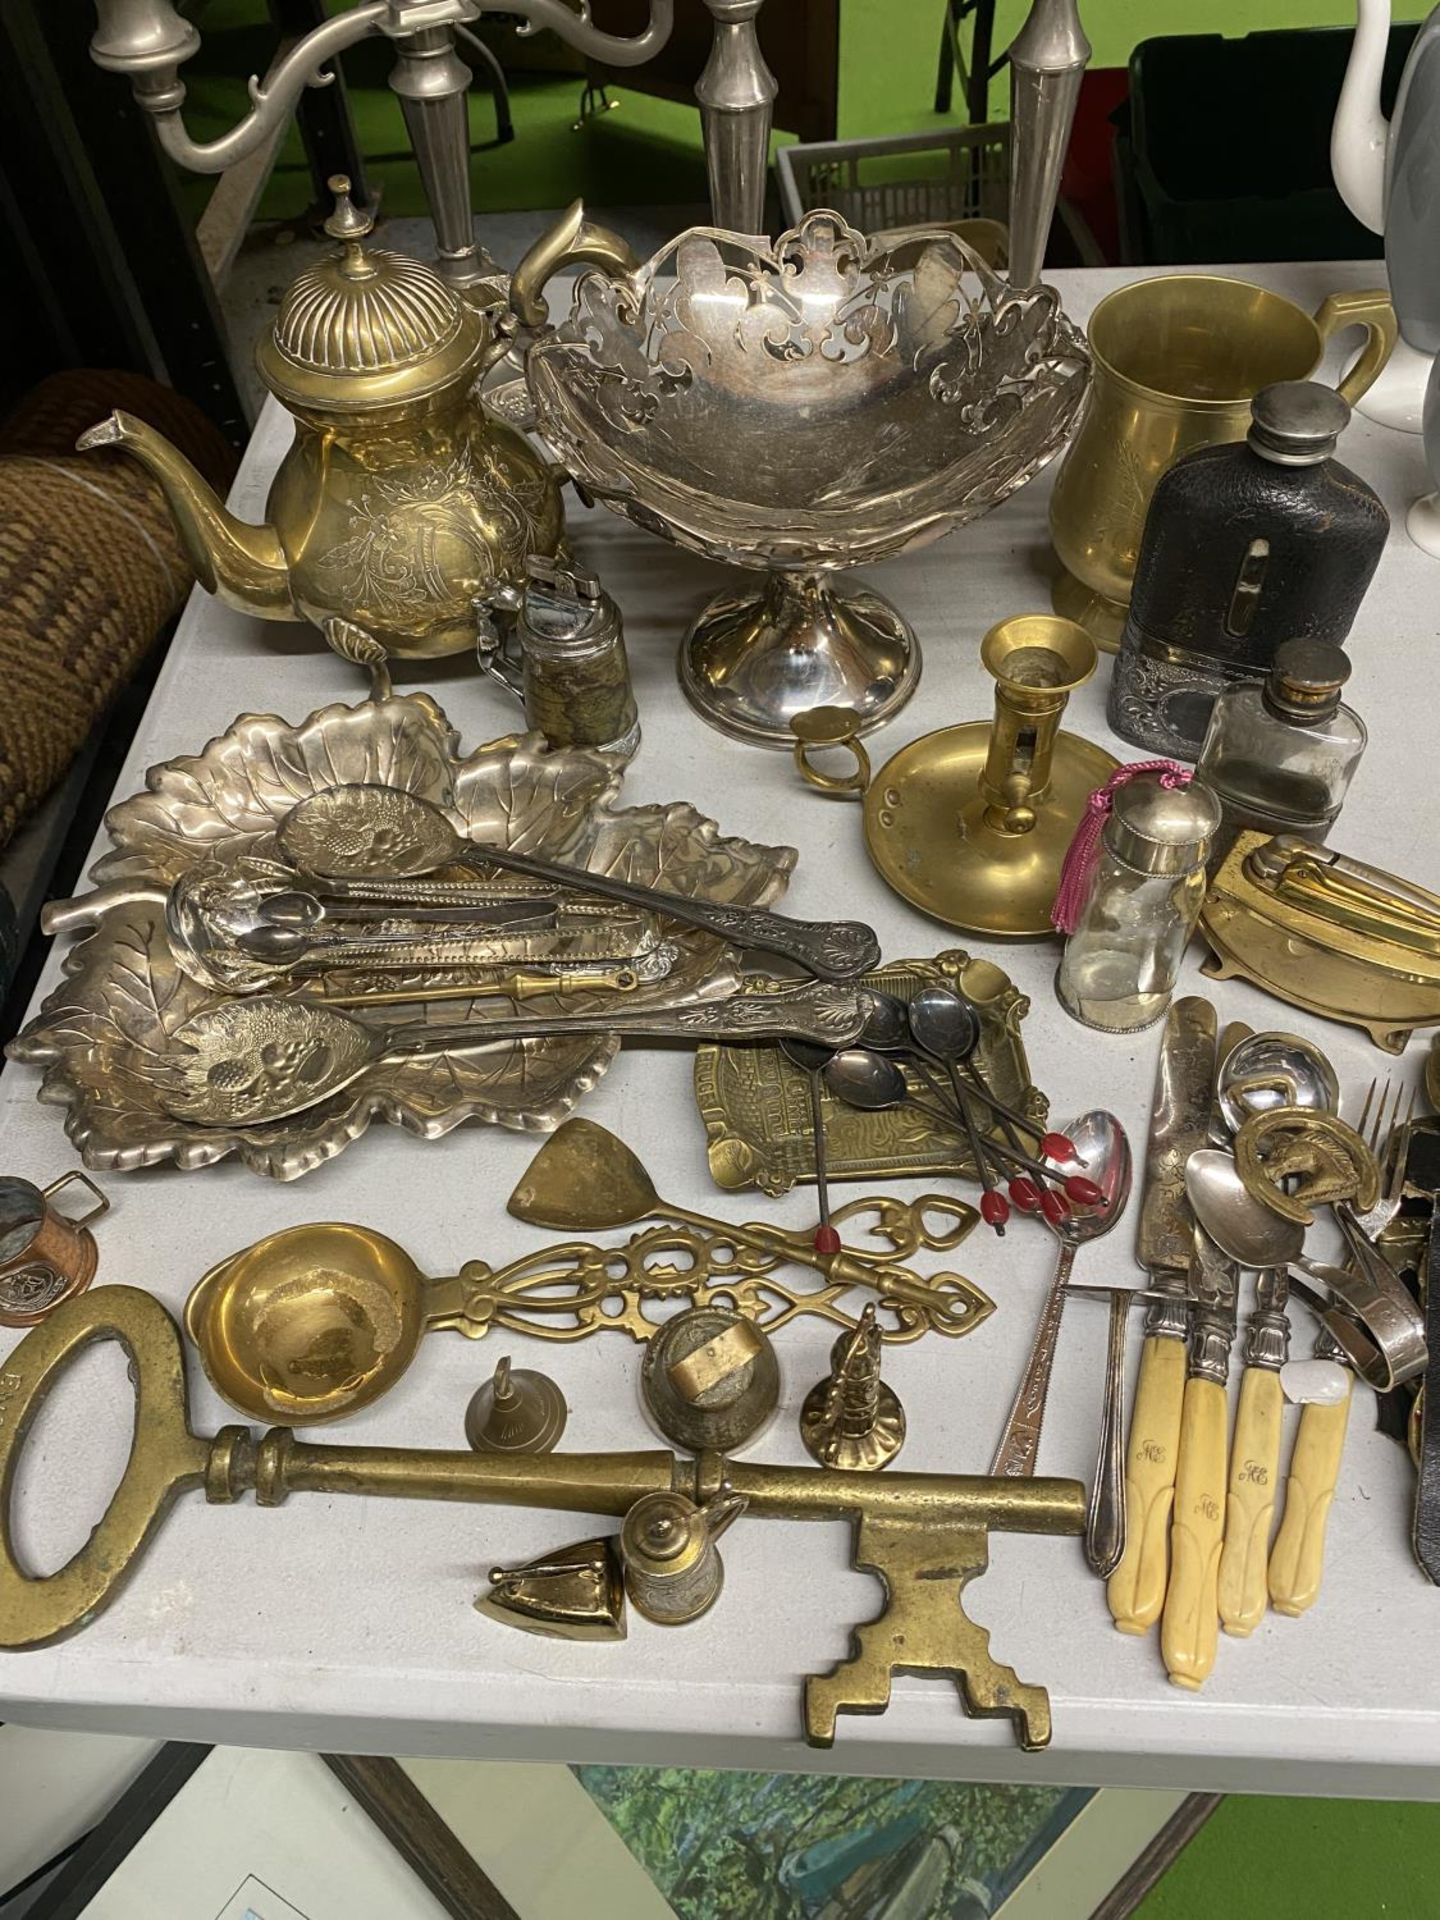 A LARGE AMMOUNT OF BRASS AND SILVER PLATE TO INCLUDE CANDLESTICKS, TAZZA DISH, FLATWARE, HIP FLASKS, - Image 2 of 3